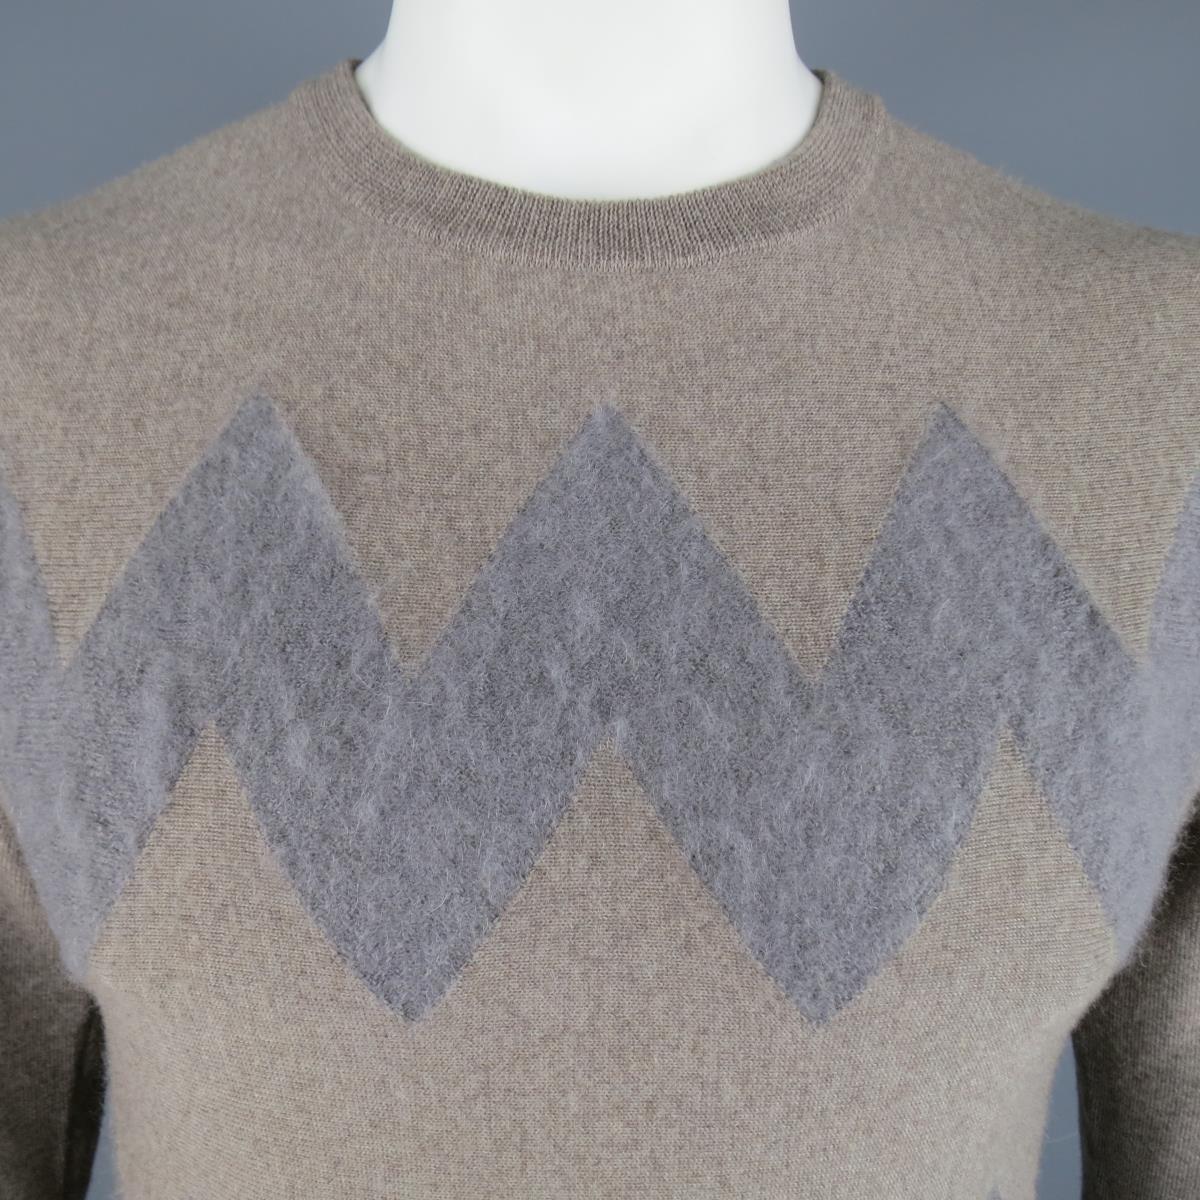 VIKTOR & ROLF Sweater consists of wool/mohair material in a taupe color tone. Designed in a crew-neck collar, zig-zag front pattern with mohair detail in grey and brown. Made in Italy. Excellent Pre-Owned Condition Marked Size: